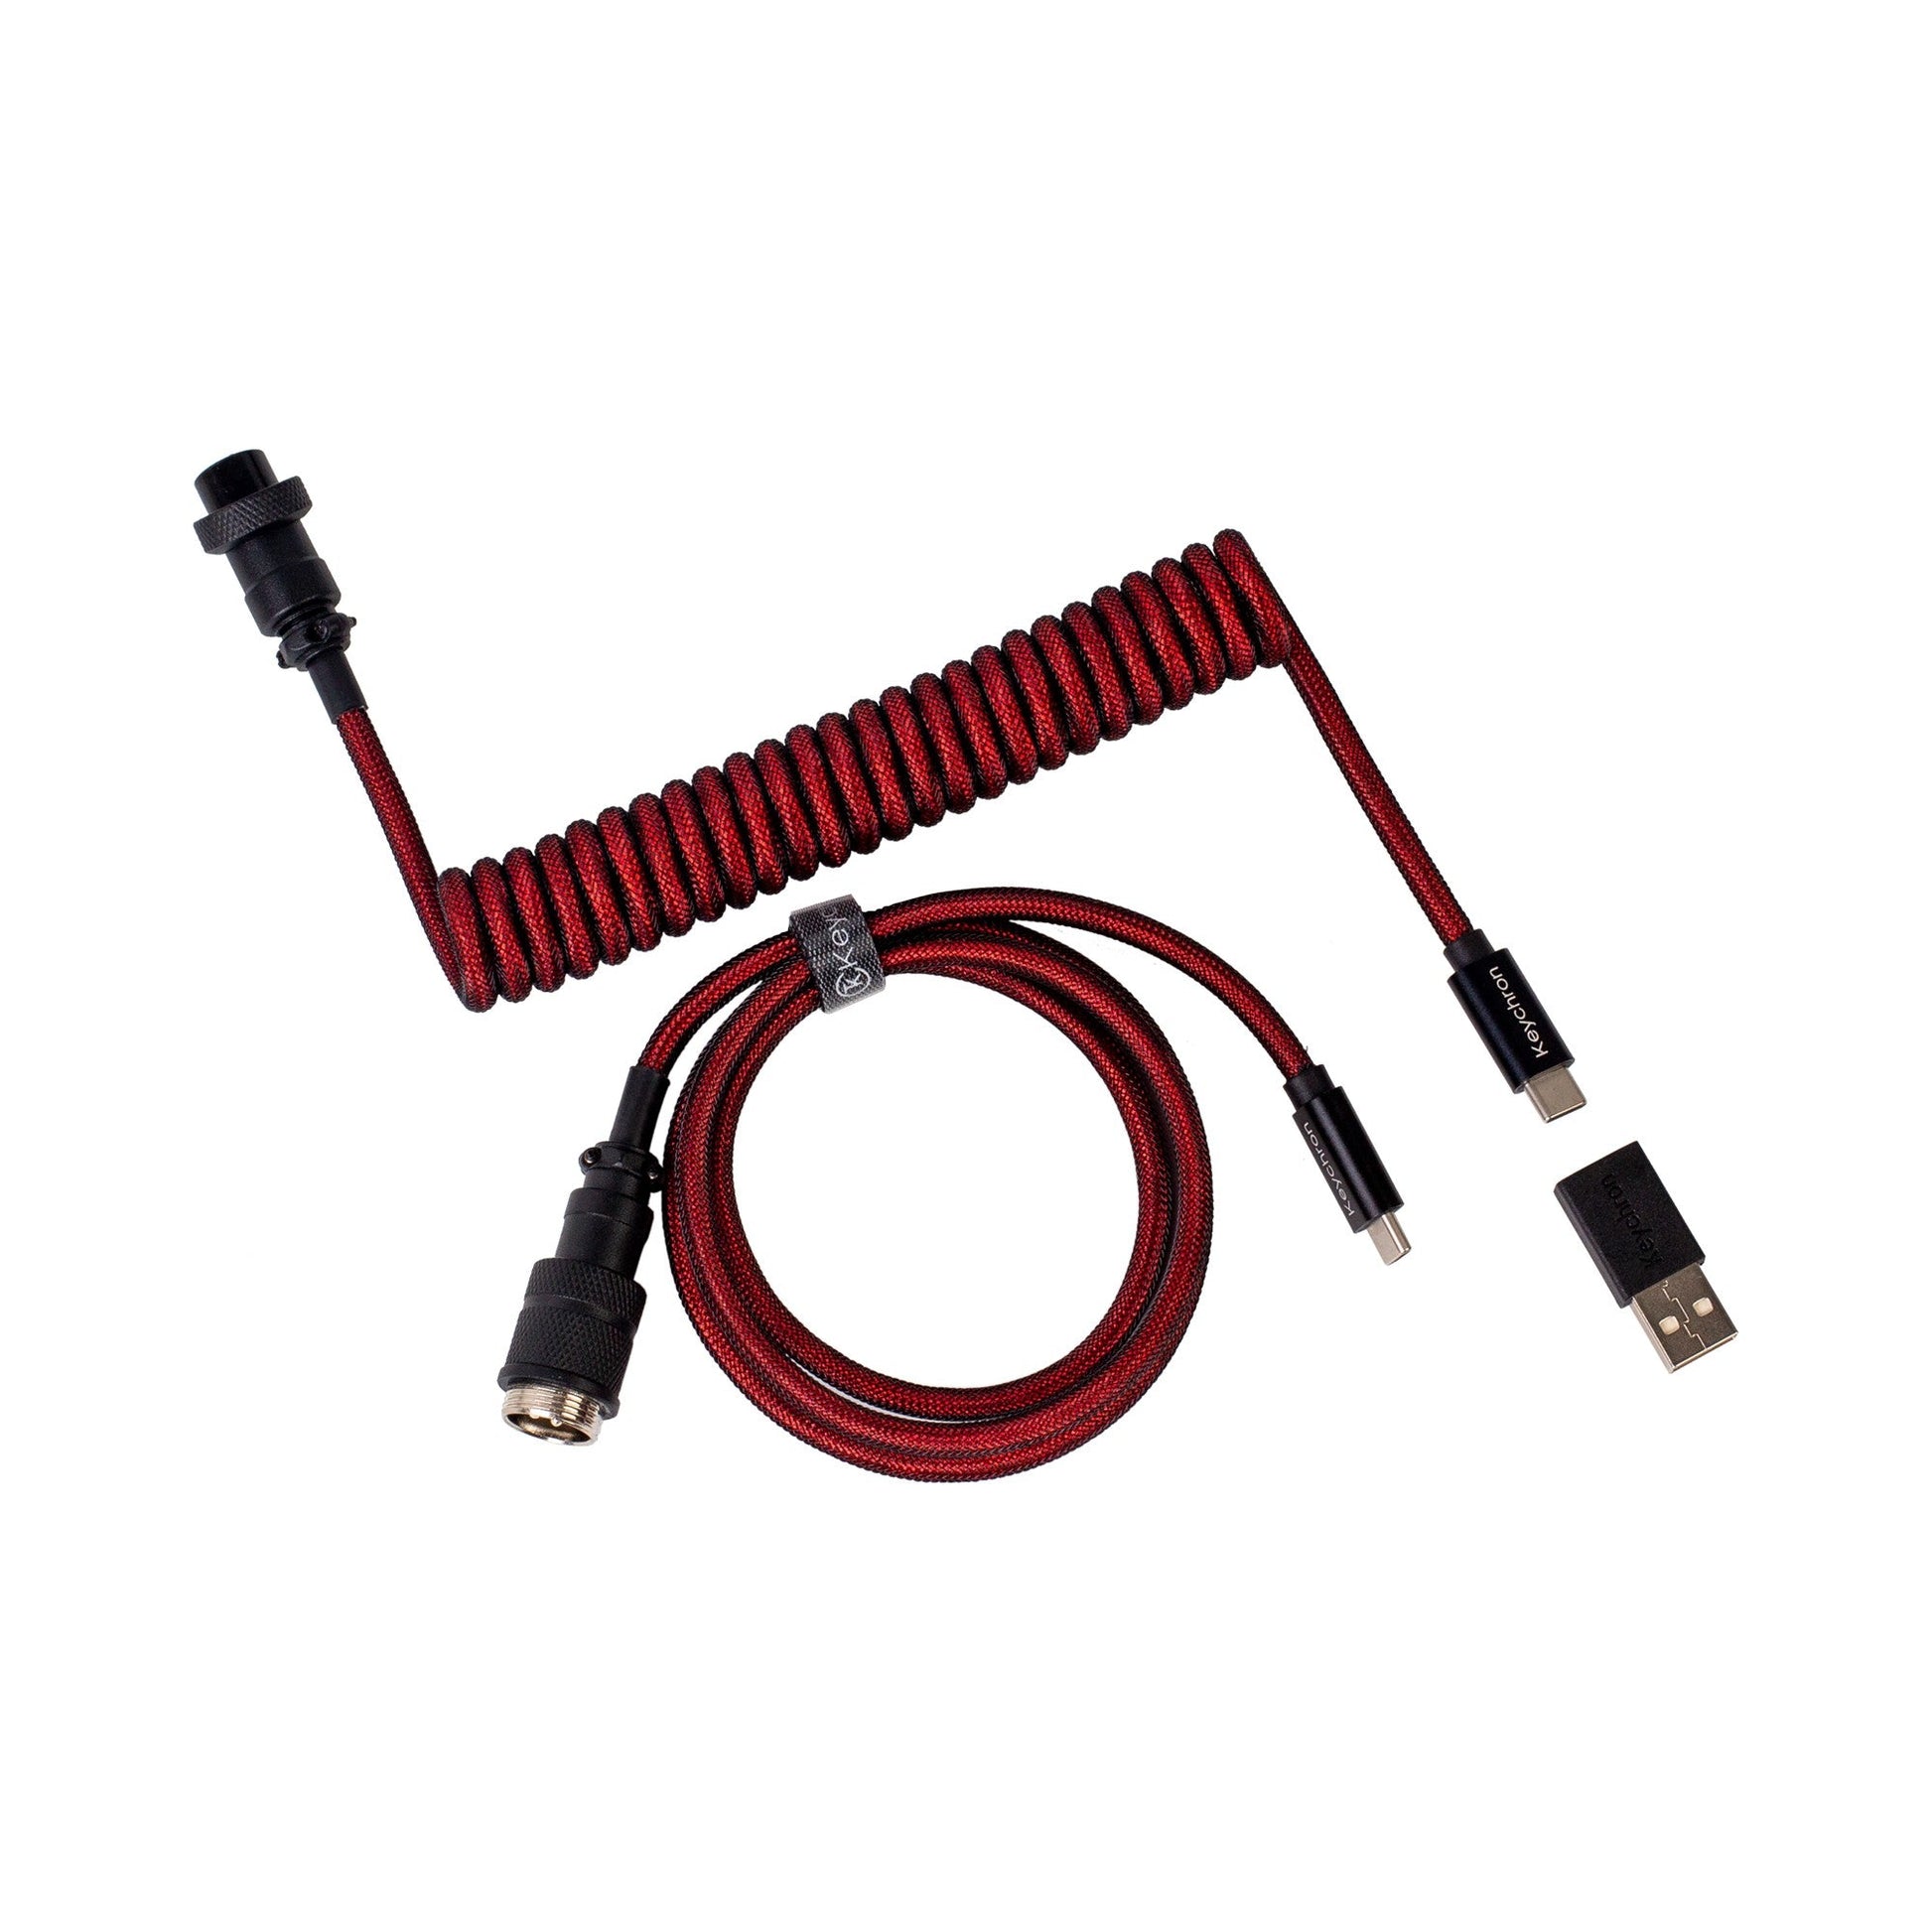 Custom USB cable with Mini XLR connector - kriscables